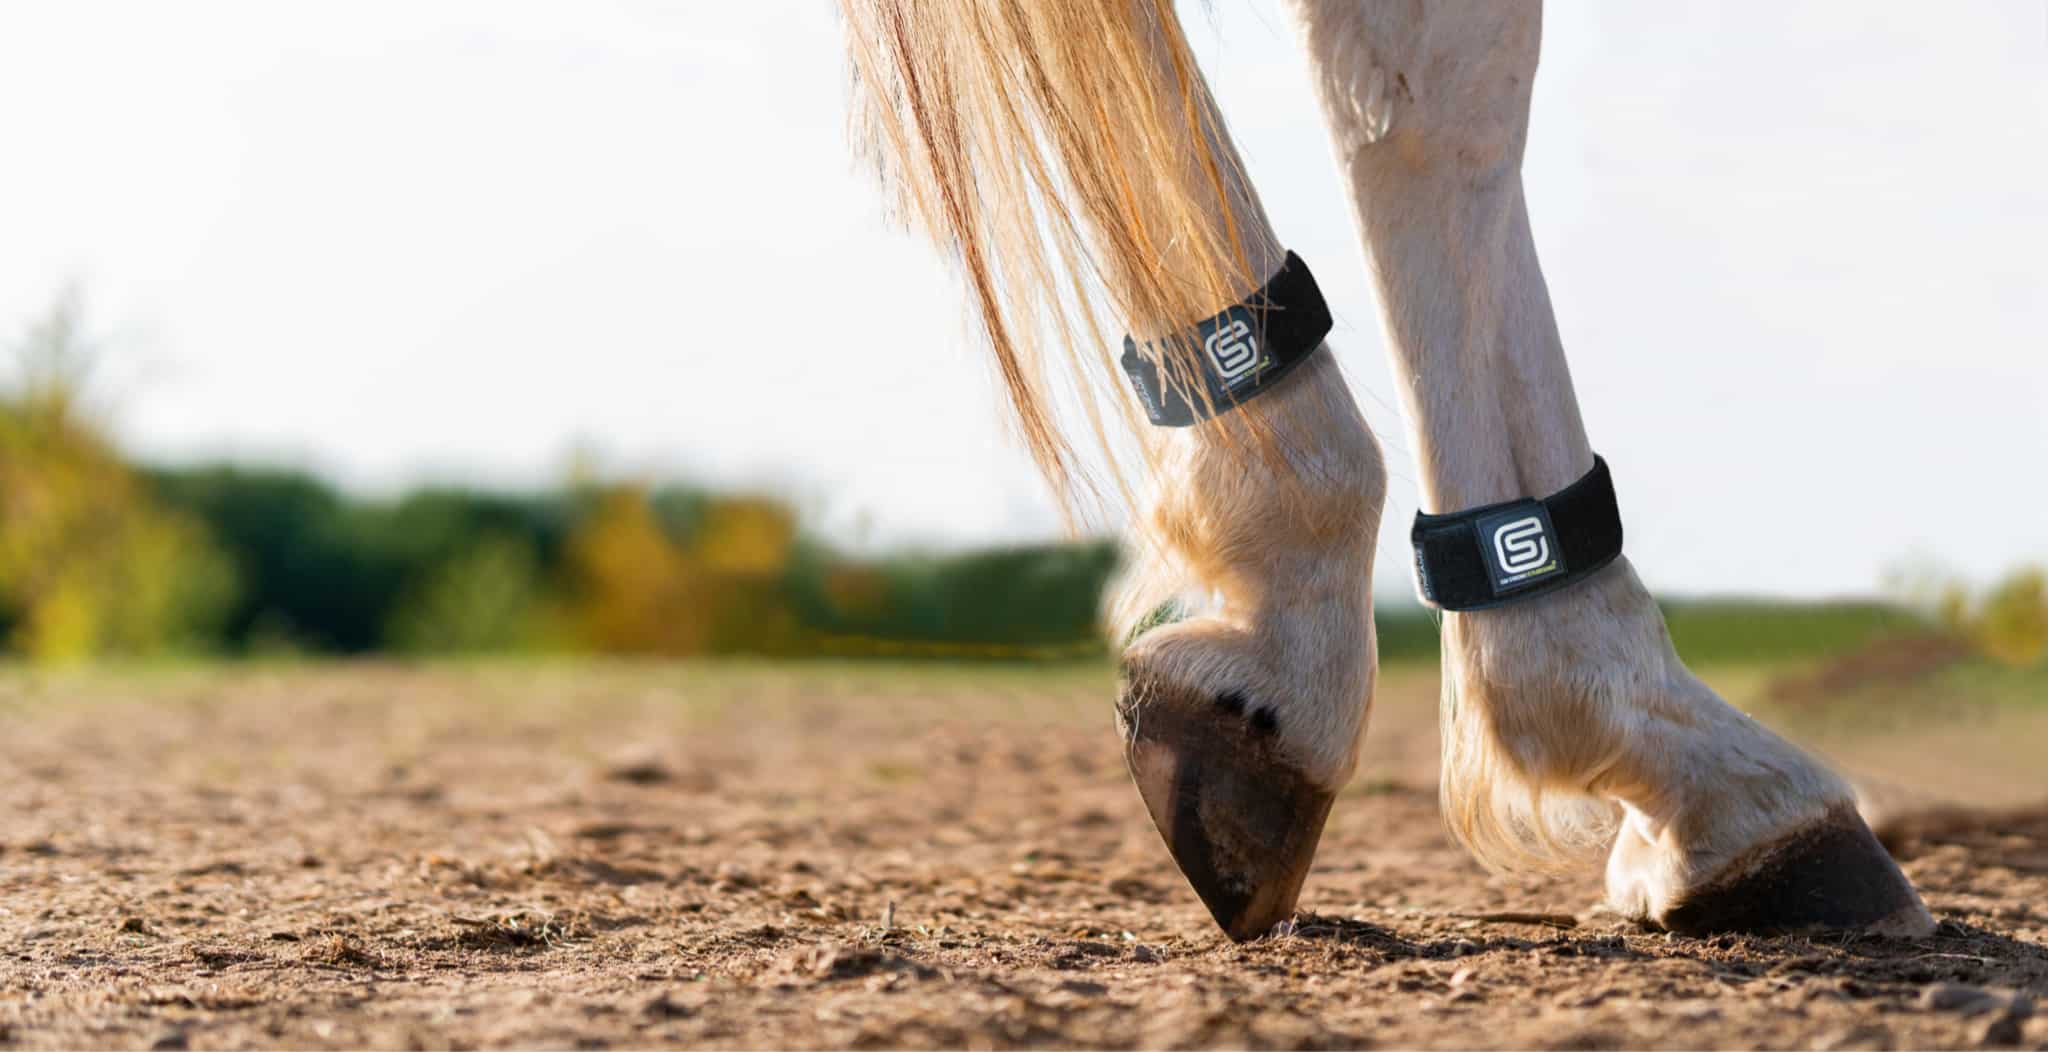 EQU Streamz magnetic horse bands for joint care and wellbeing in horses. help with laminitis, arthritis, navicular, ring bone, edema and much more. Two bands on horses legs.